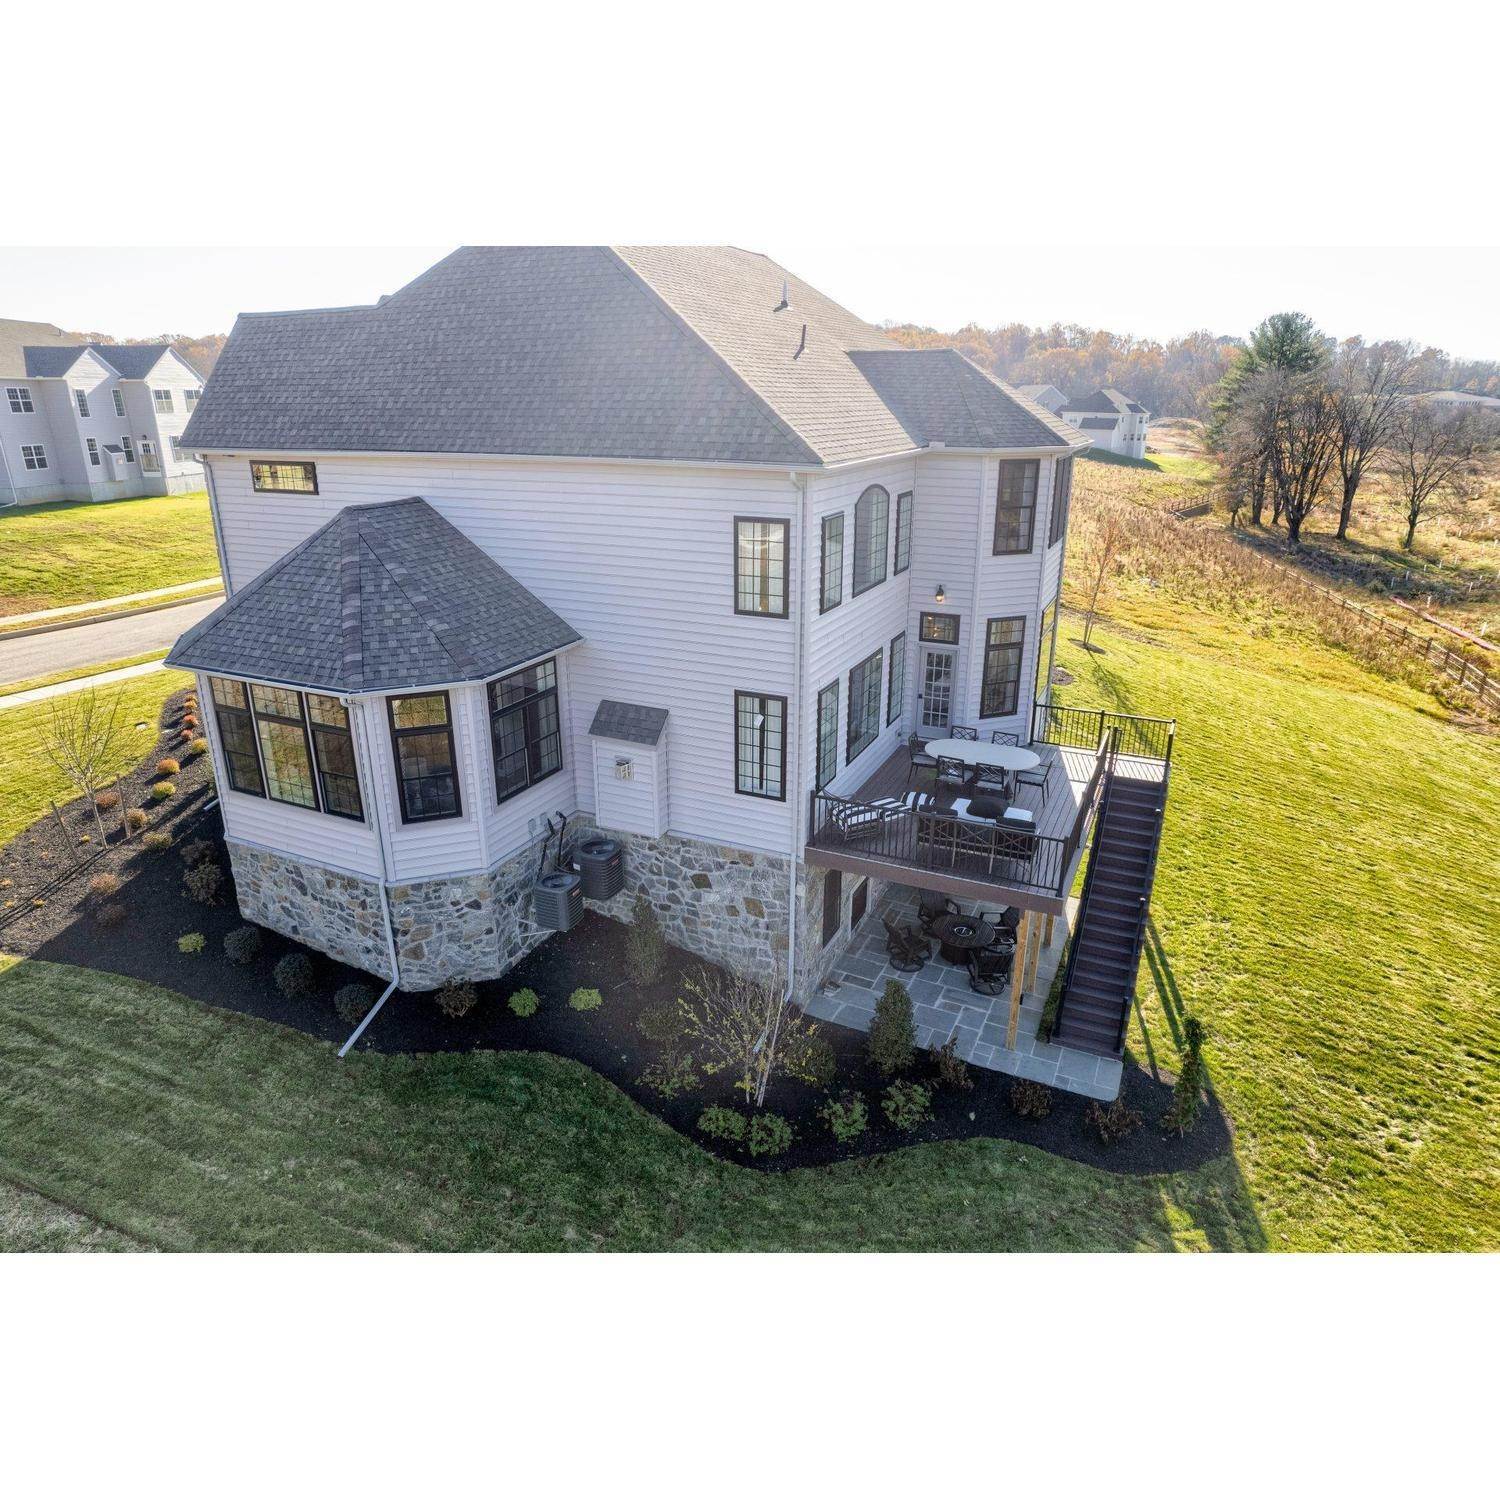 47. 101 Parkview Way, Newtown Square, PA 19073에 Ventry at Edgmont Preserve 건물